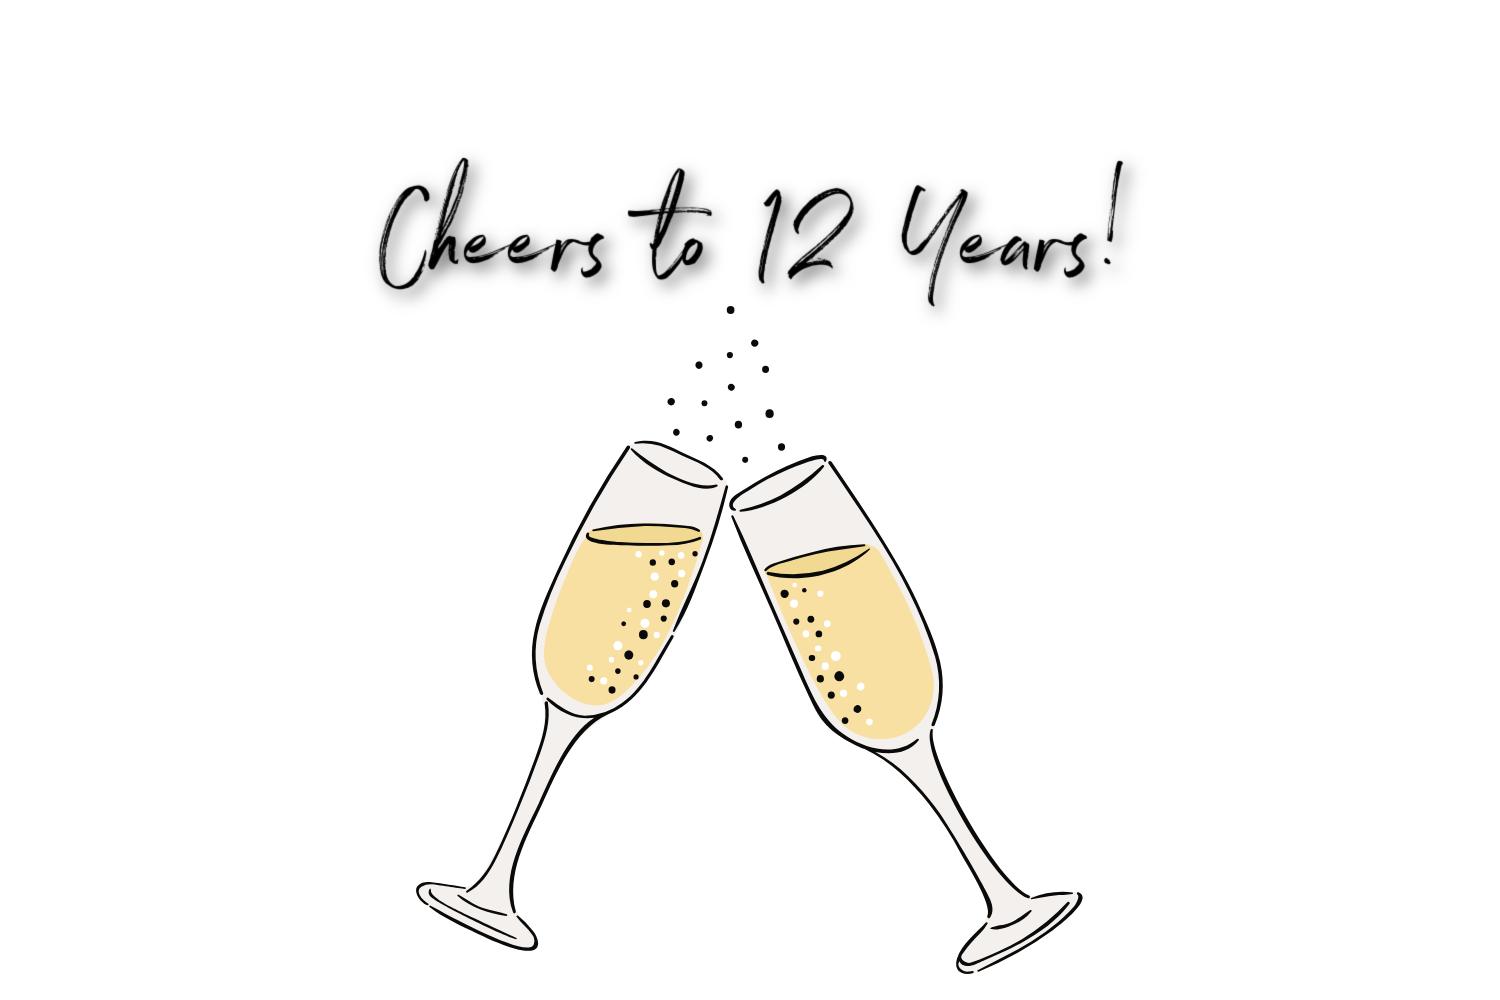 This is an artwork graphic showing two champagne glasses clinking together. Above the glasses, it says - Cheers to 12 years! 